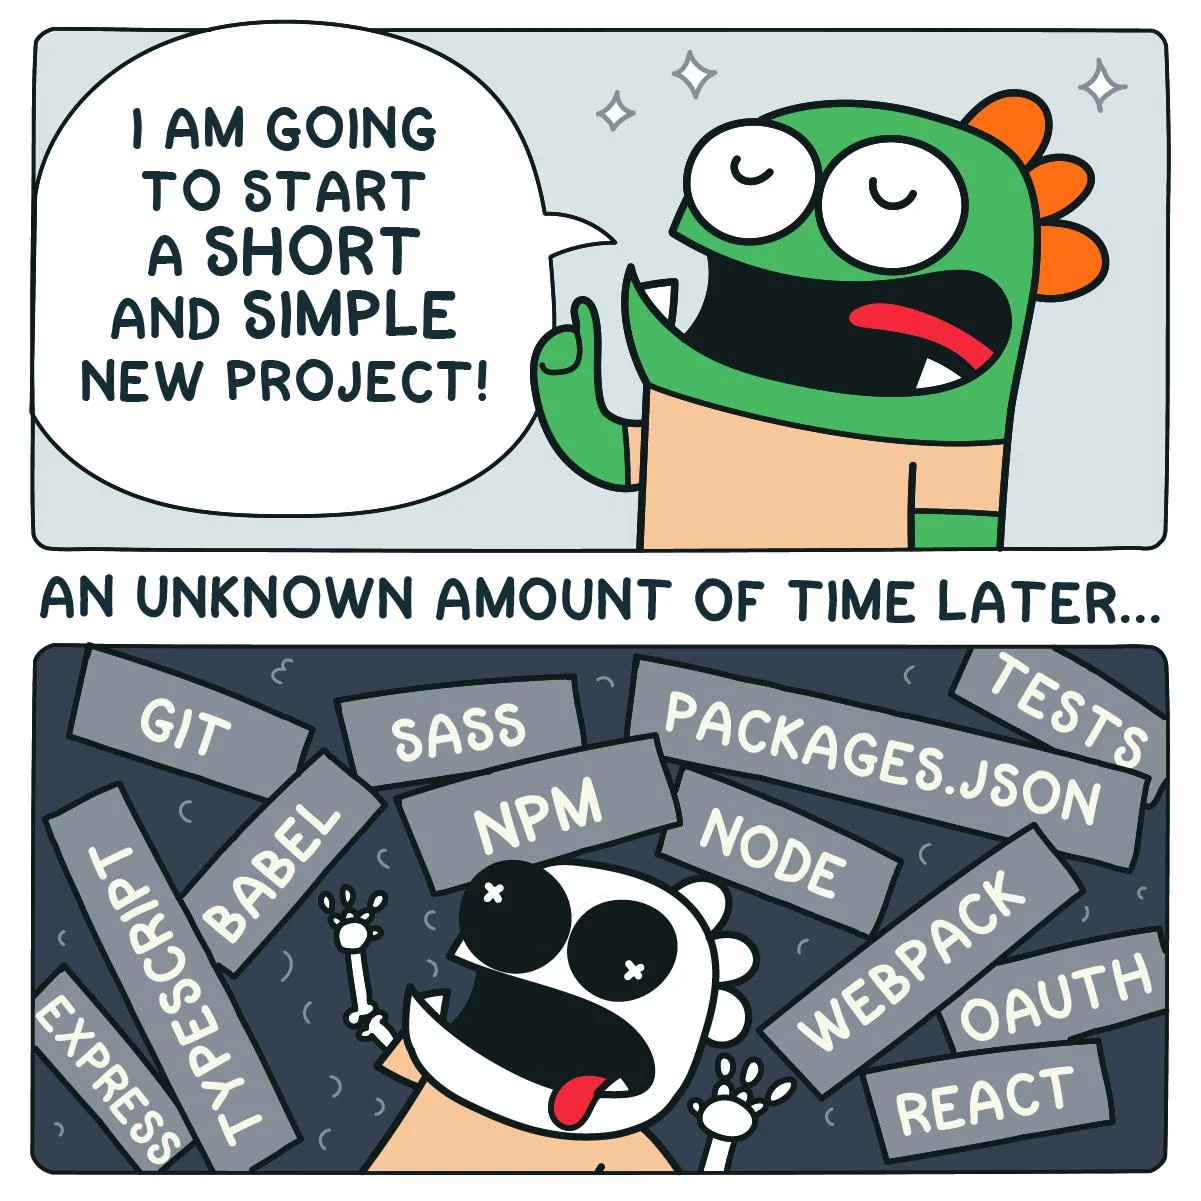 Comic with two panes, first a protagonist eagerly declaring they will start a short simple project, second an unknown time later the protagonist is overwhelmed by a plethora of tools, frameworks, technologies. Source: https://twitter.com/garabatokid/status/1111583391705690112